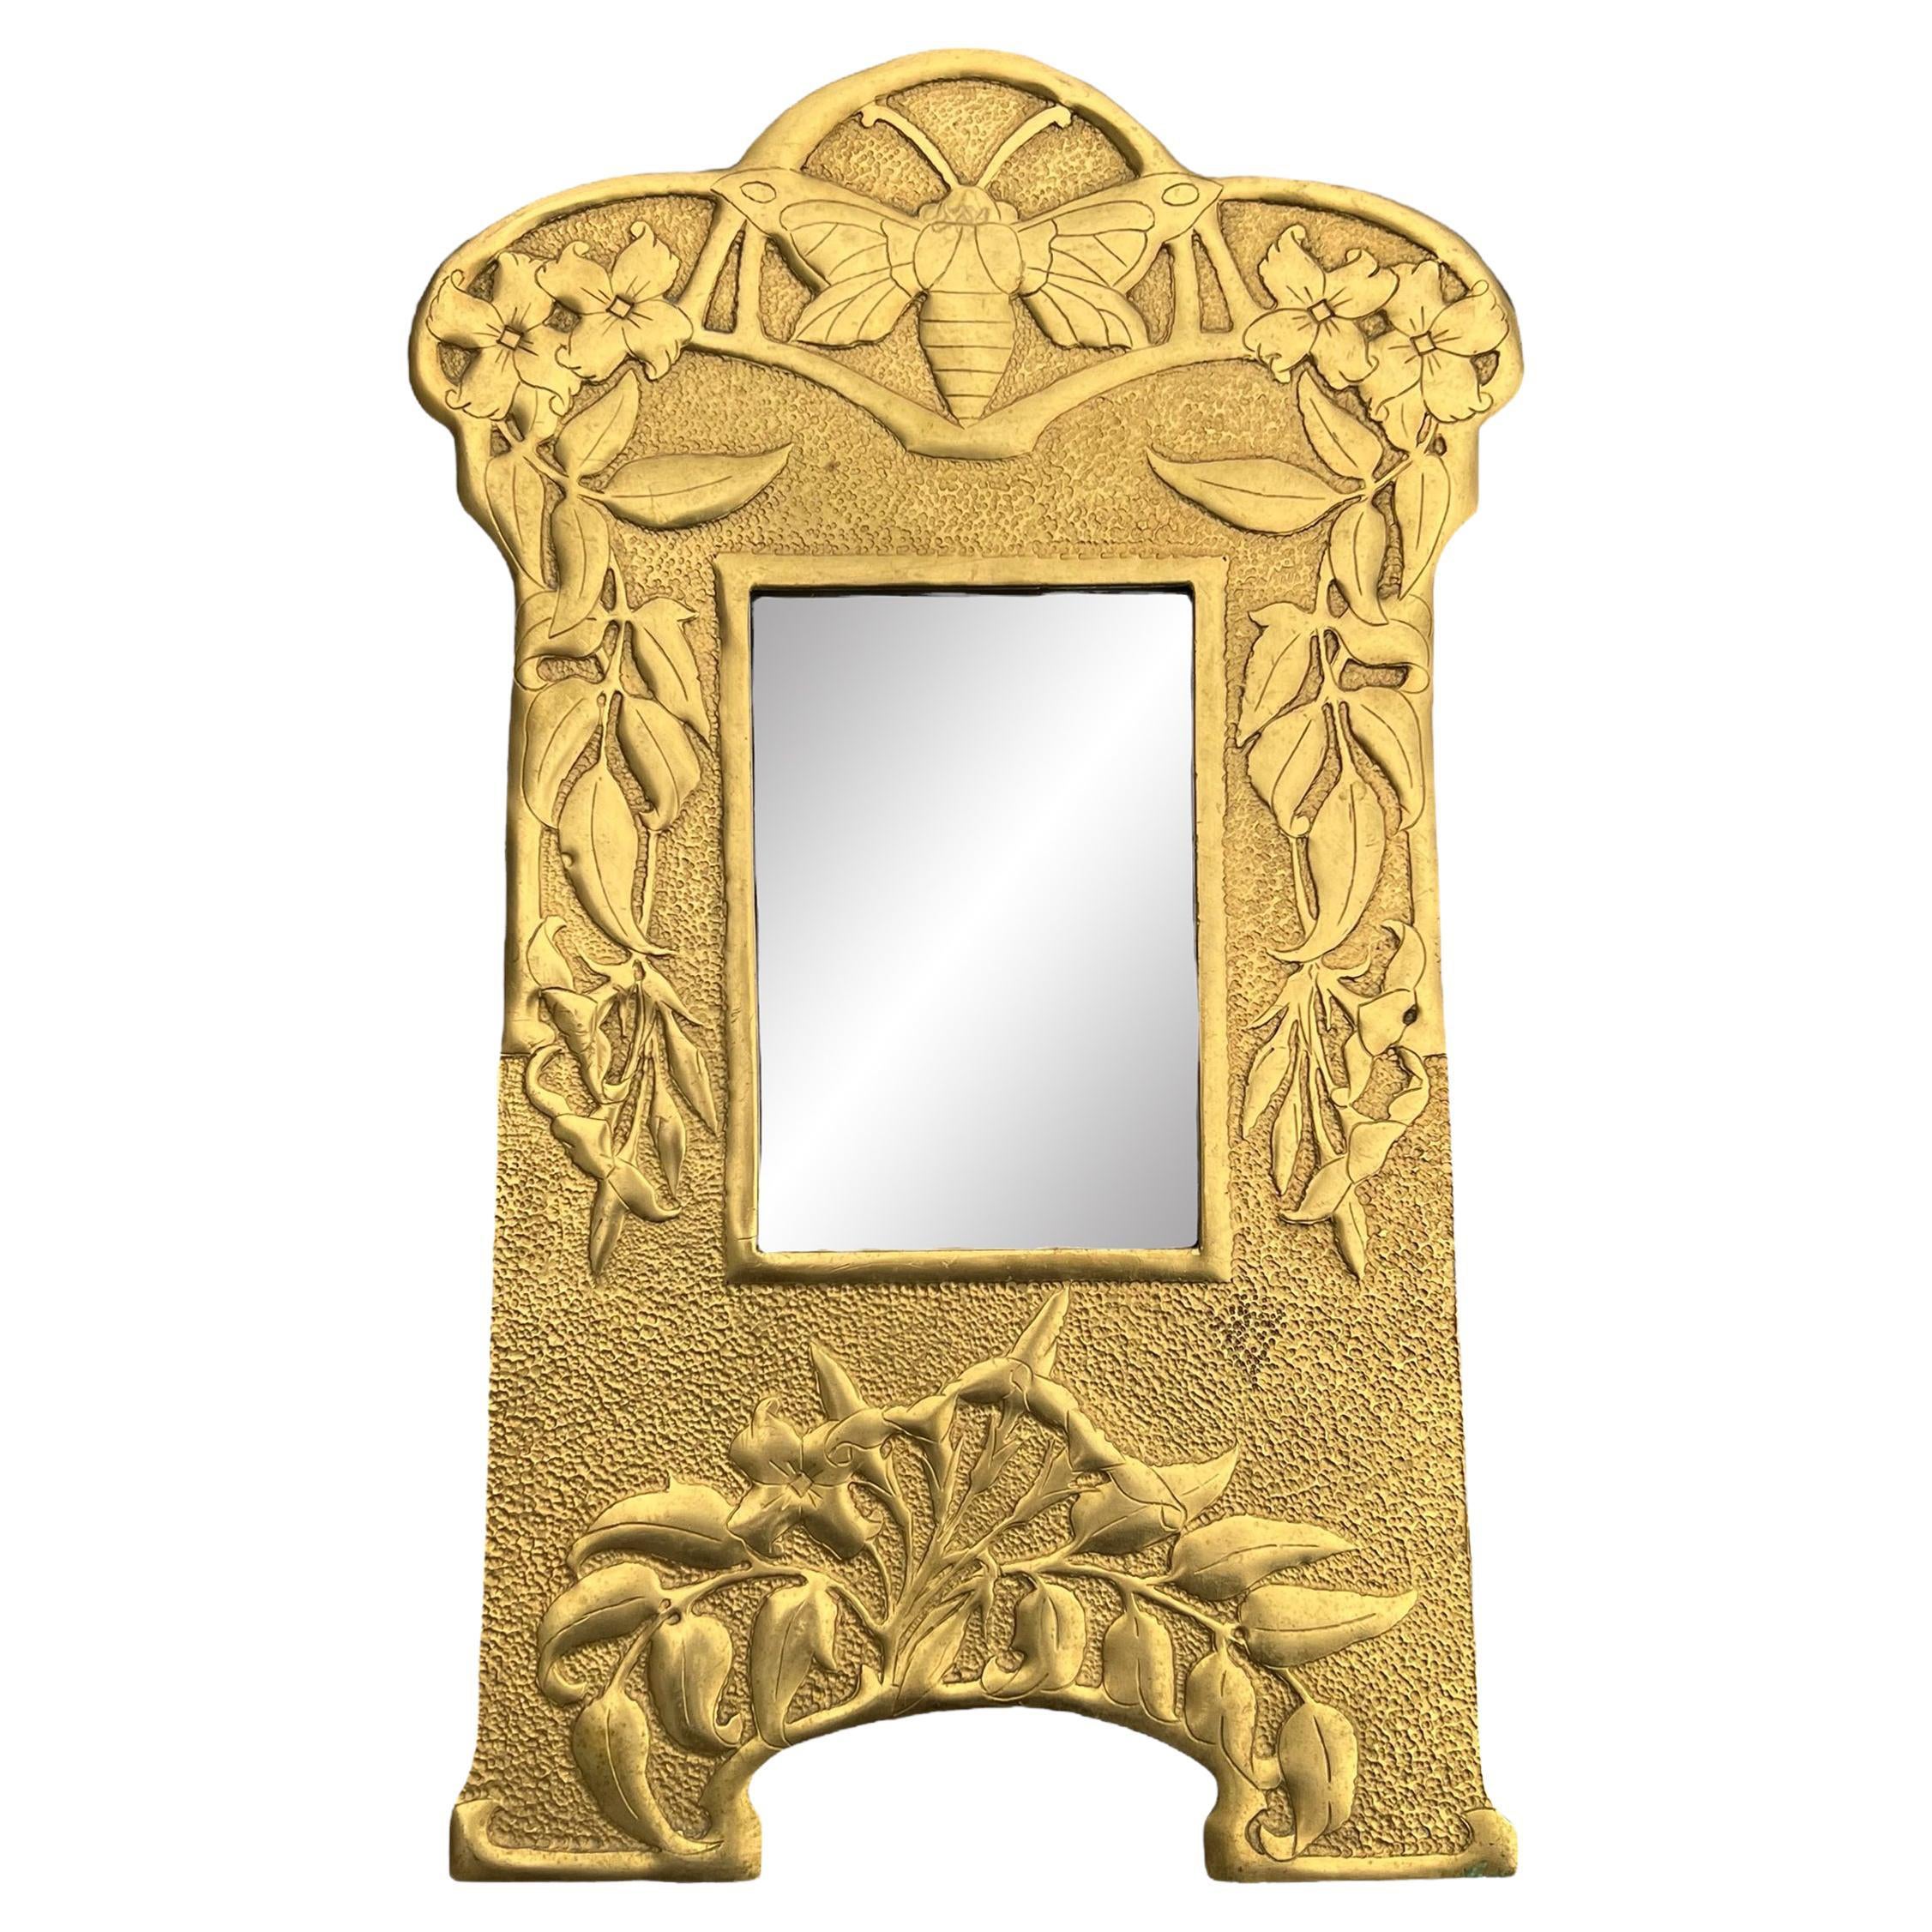 Early 20th Century English Art Nouveau Brass Framed Mirror For Sale